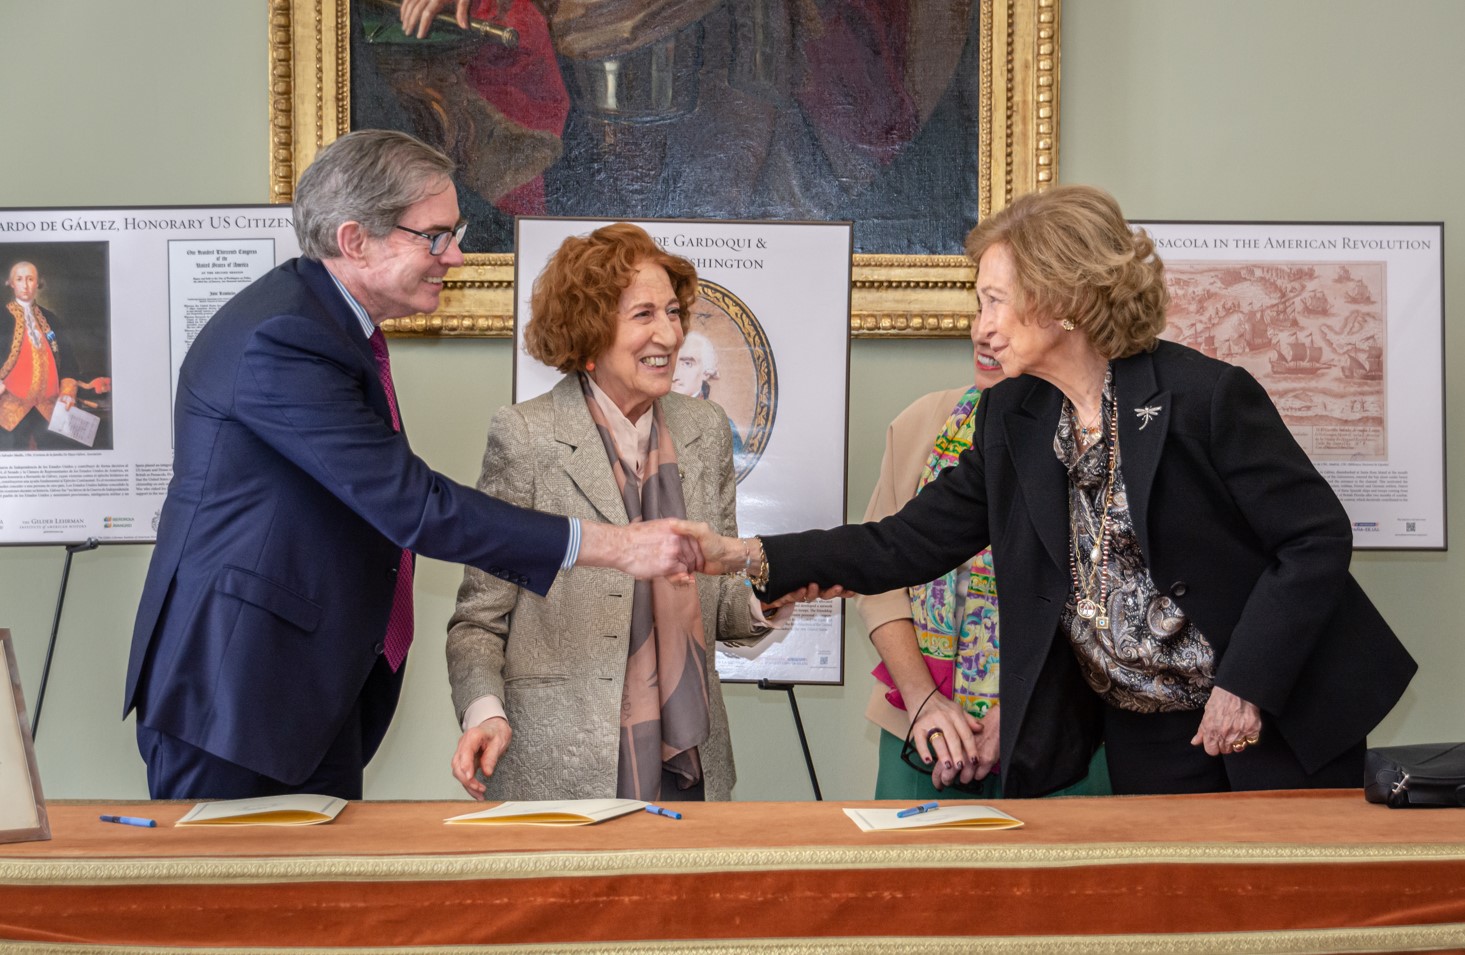 (left to right) Gilder Lehrman President James G. Basker; Carmen Iglesias, Director of the Royal Academy of History; and Her Majesty Queen Sofía of Spain